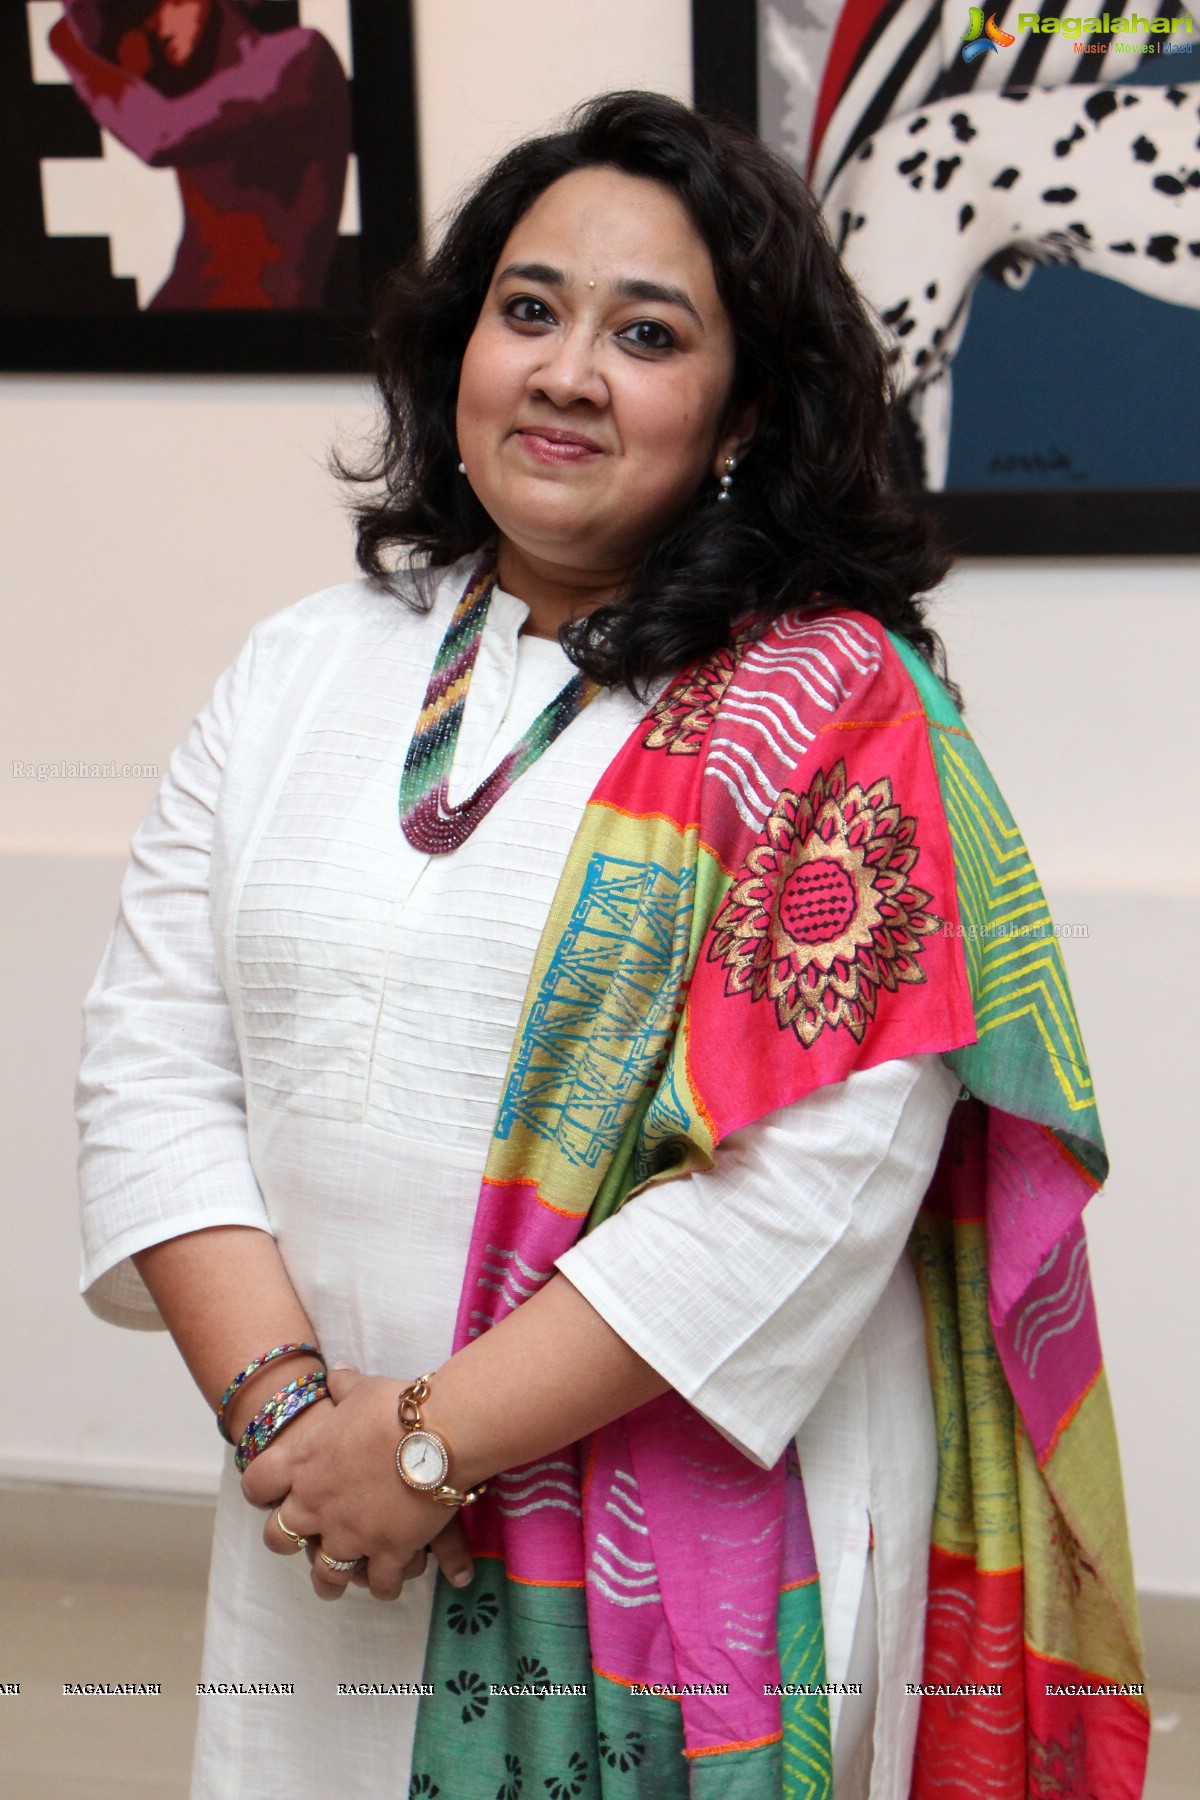 Sonaly Gandhi Lakhotia Art Exhibition at Gallery Space, Hyderabad - Curated by Fawad Tamkanat